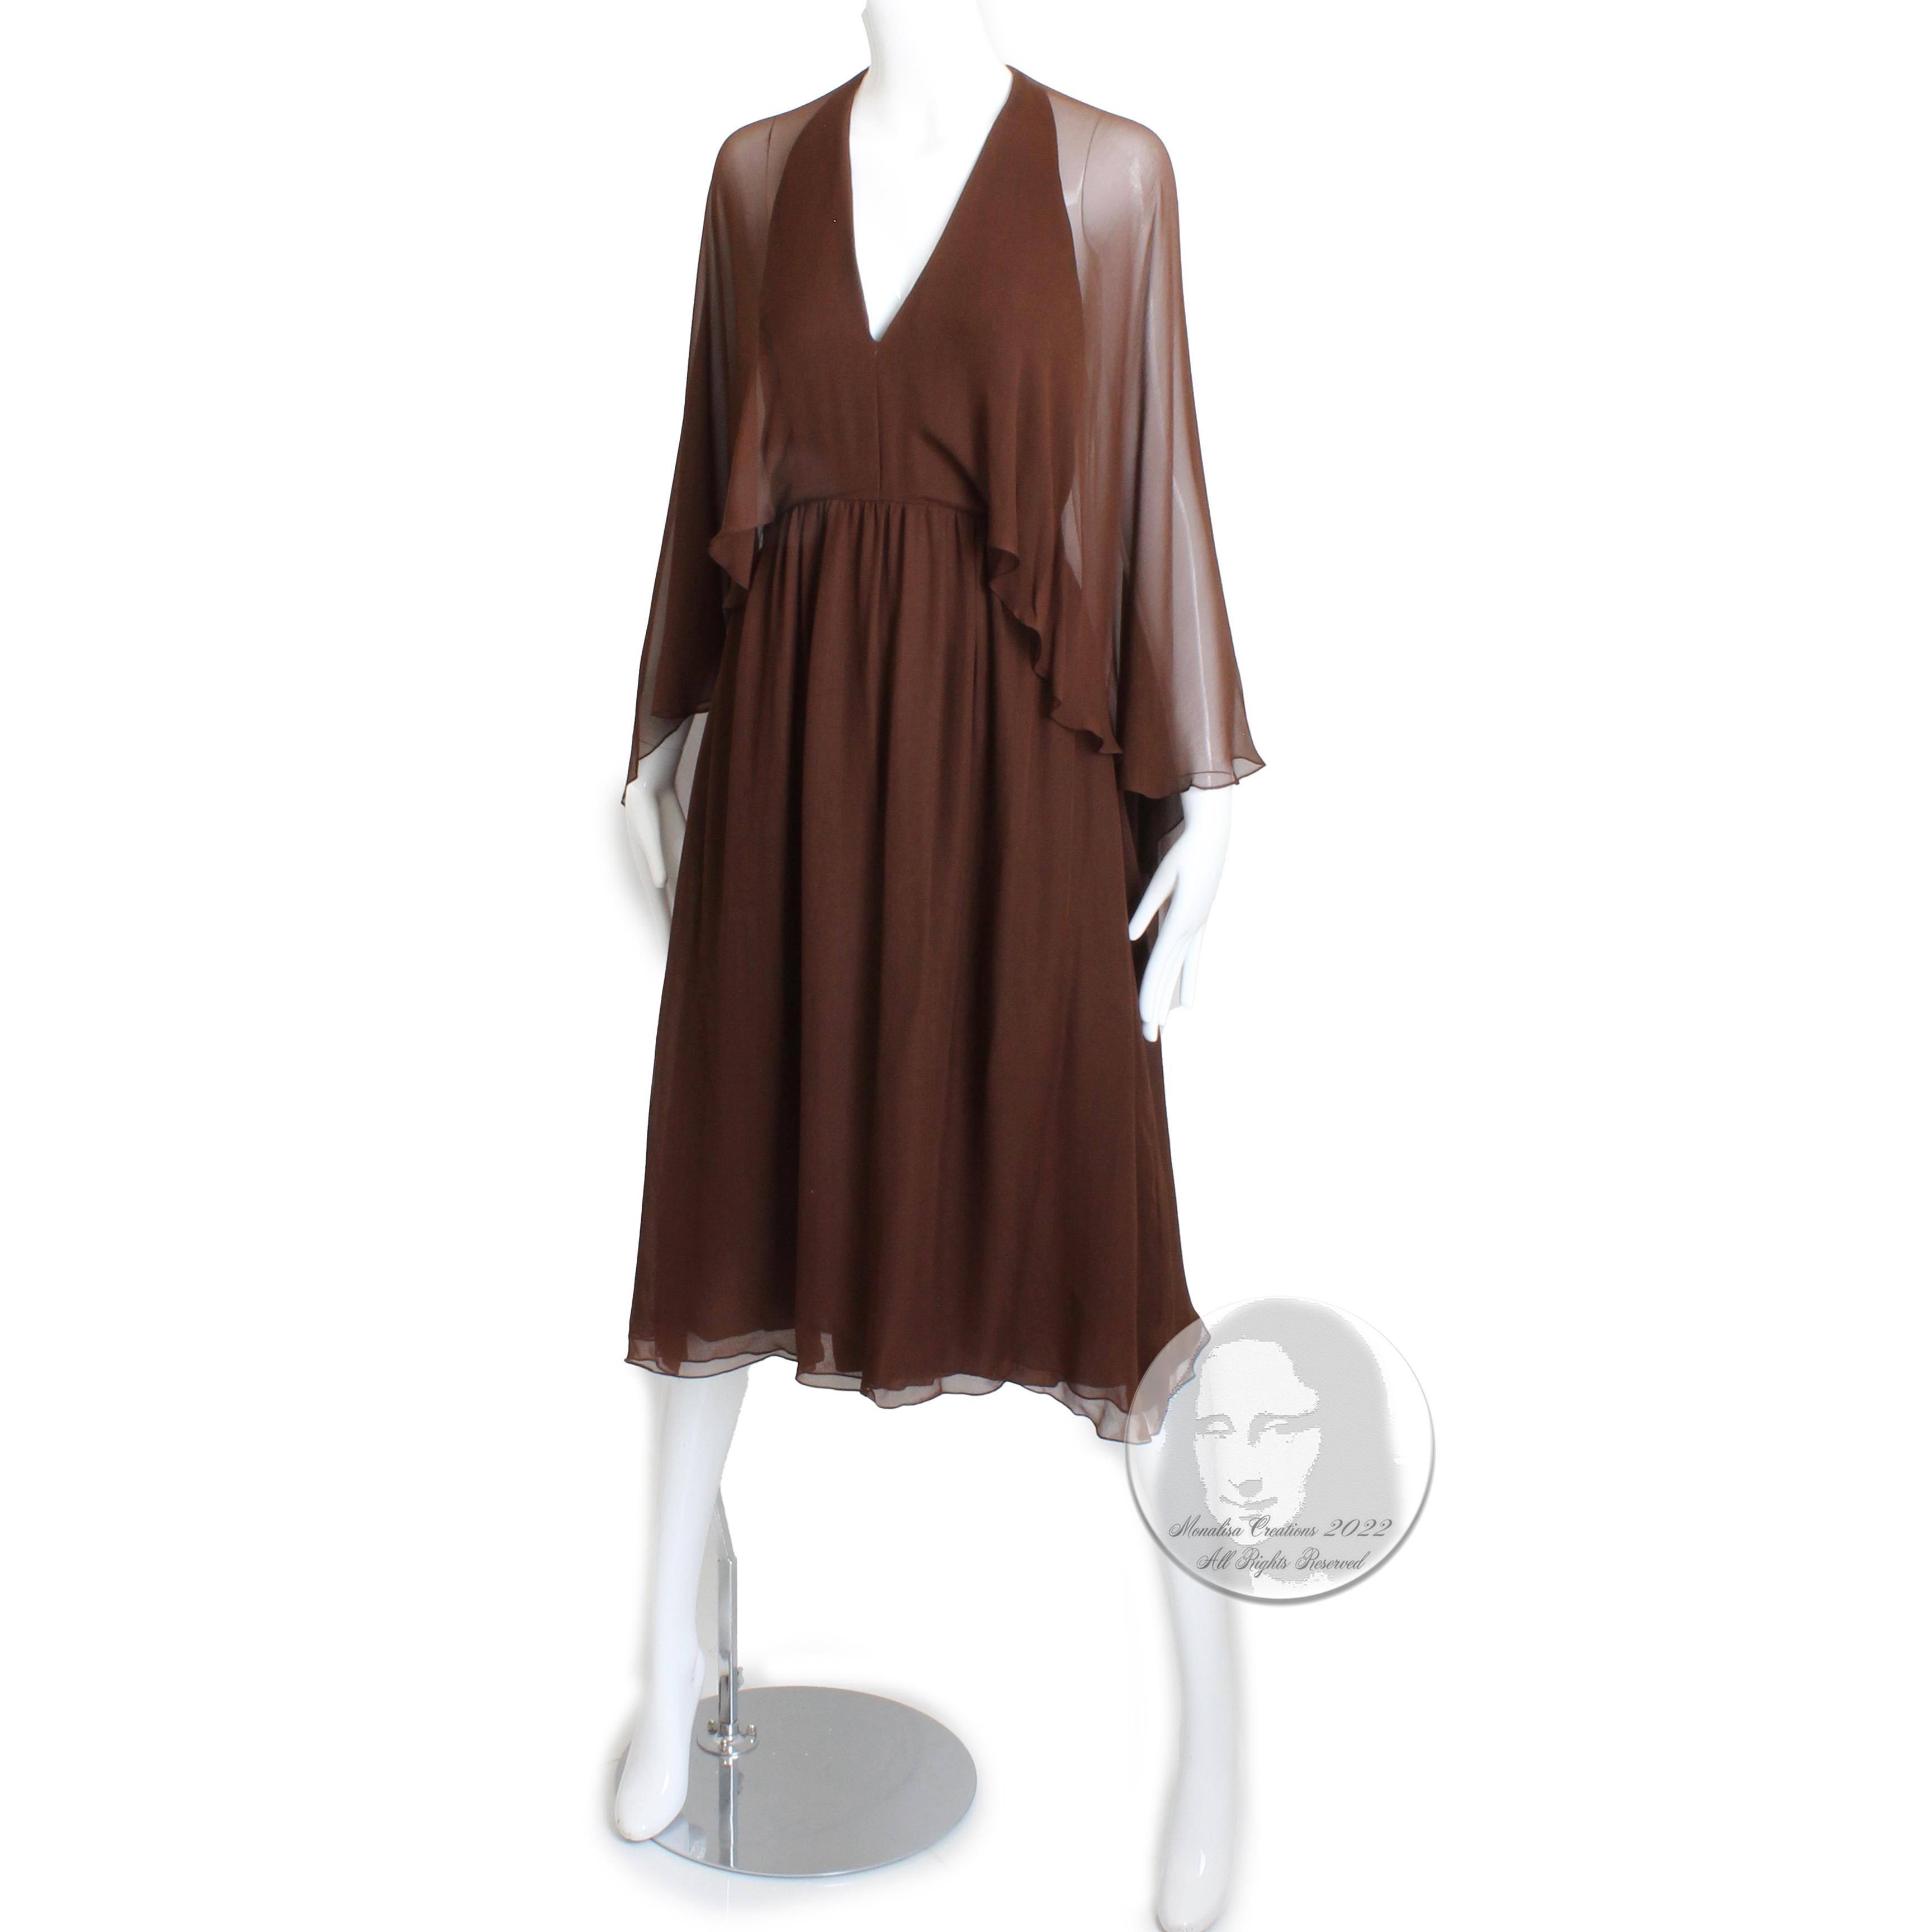 This fabulous Halston halter dress is from 1975 and has an ethereal quality with its attached sheer shawl that can be worn as angel sleeves or pushed around the neck, shawl-style.  Fully-lined, it fastens in back with a zipper and several hidden